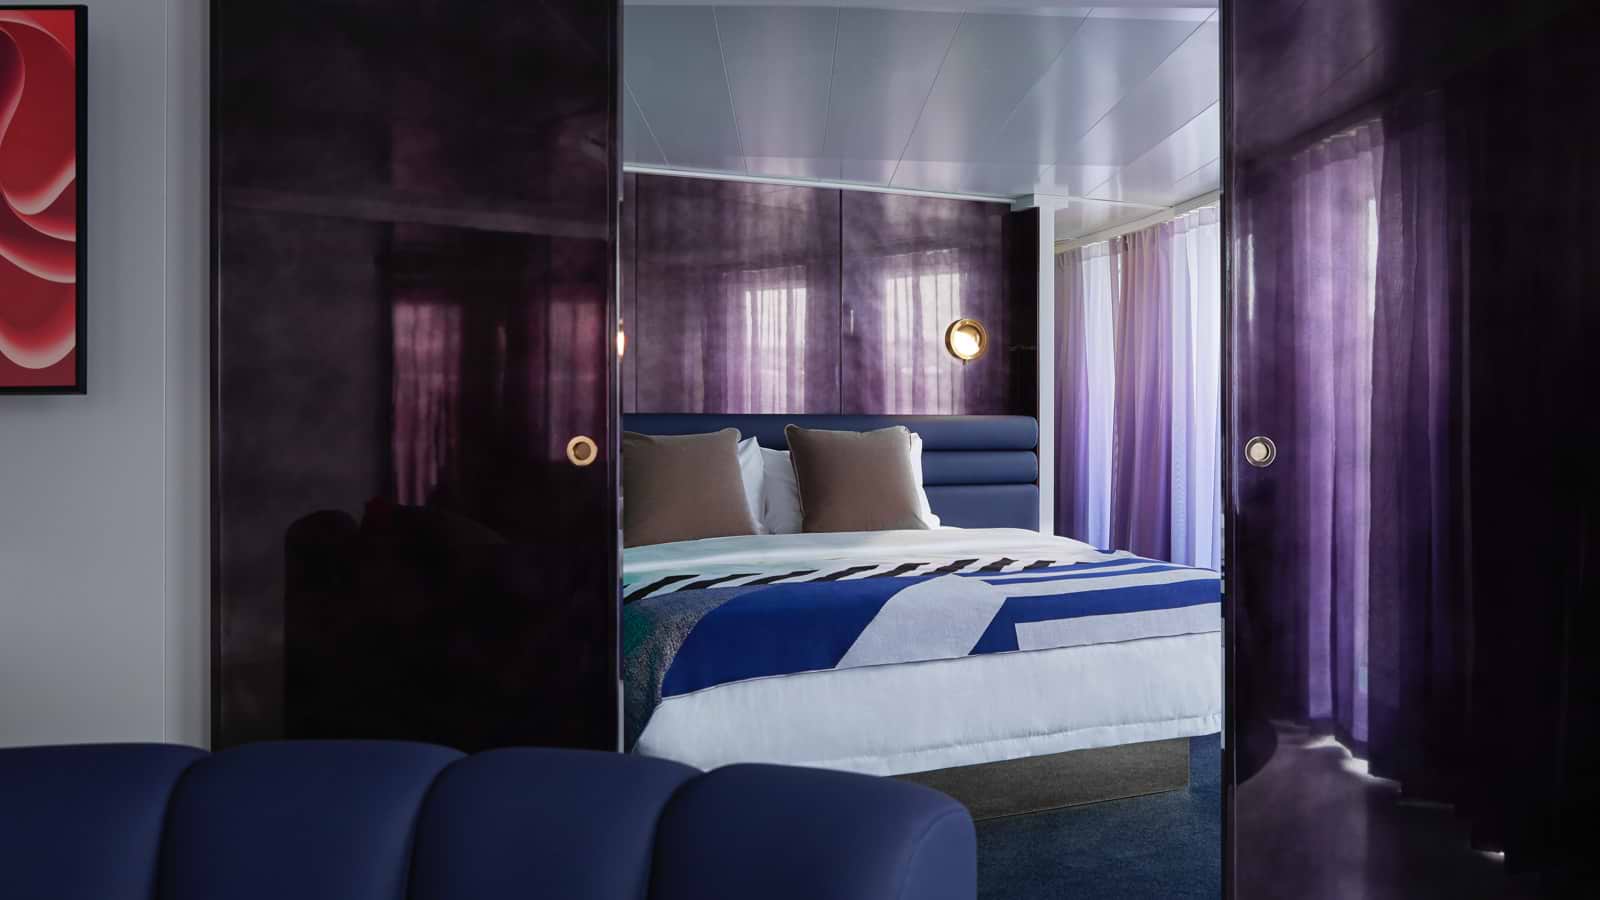 With transfers or valet parking included, get the VIP treatment before you sail, then step into your suite digs like you’re touring the world.